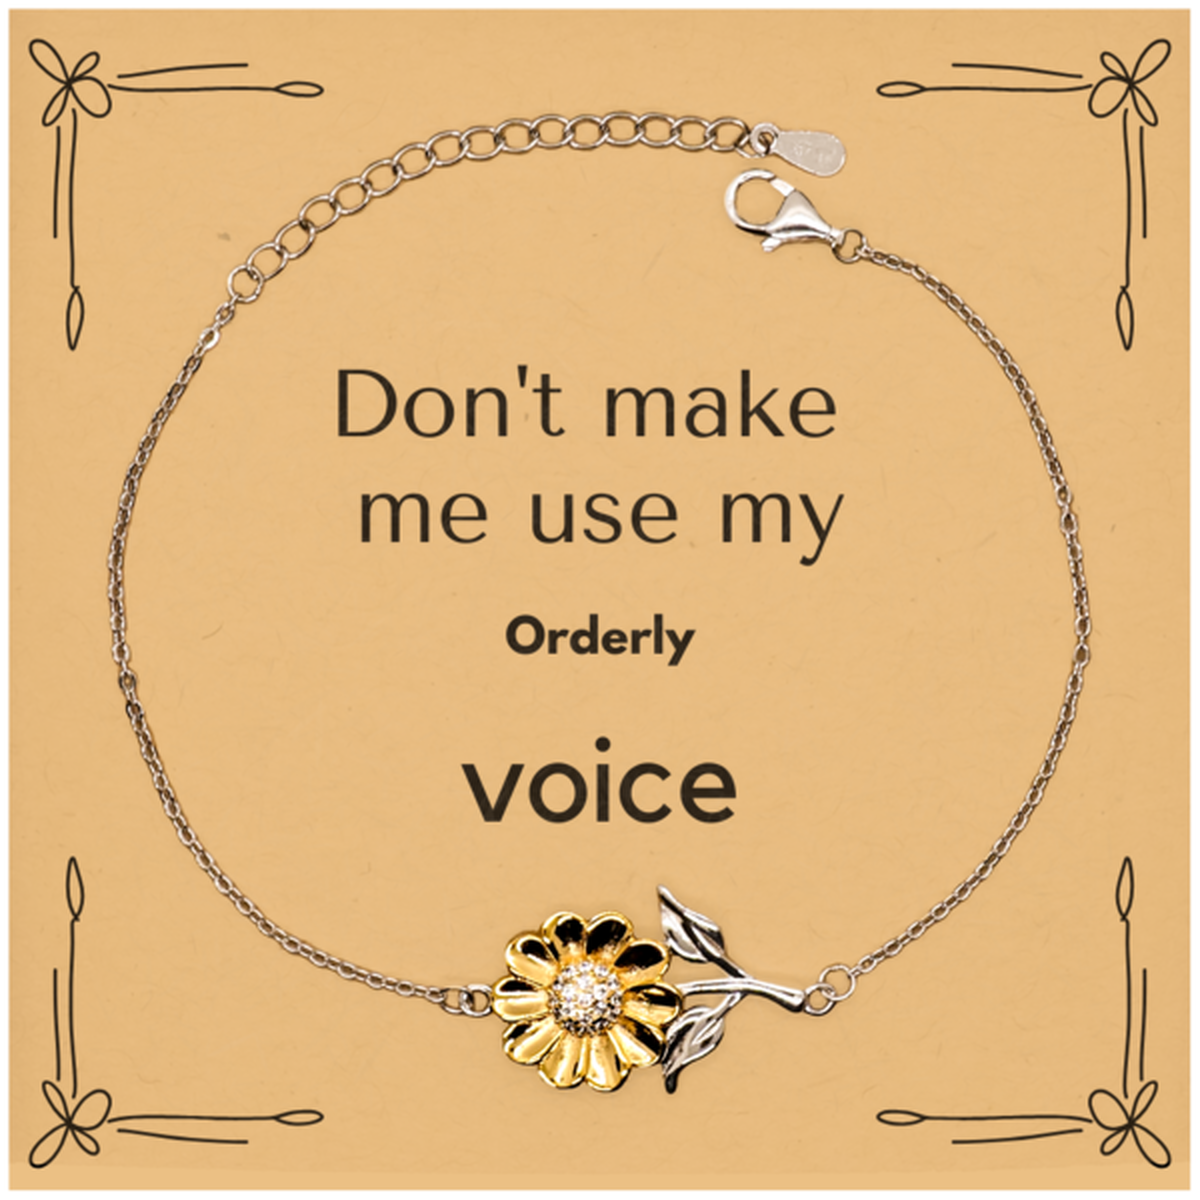 Don't make me use my Orderly voice, Sarcasm Orderly Card Gifts, Christmas Orderly Sunflower Bracelet Birthday Unique Gifts For Orderly Coworkers, Men, Women, Colleague, Friends